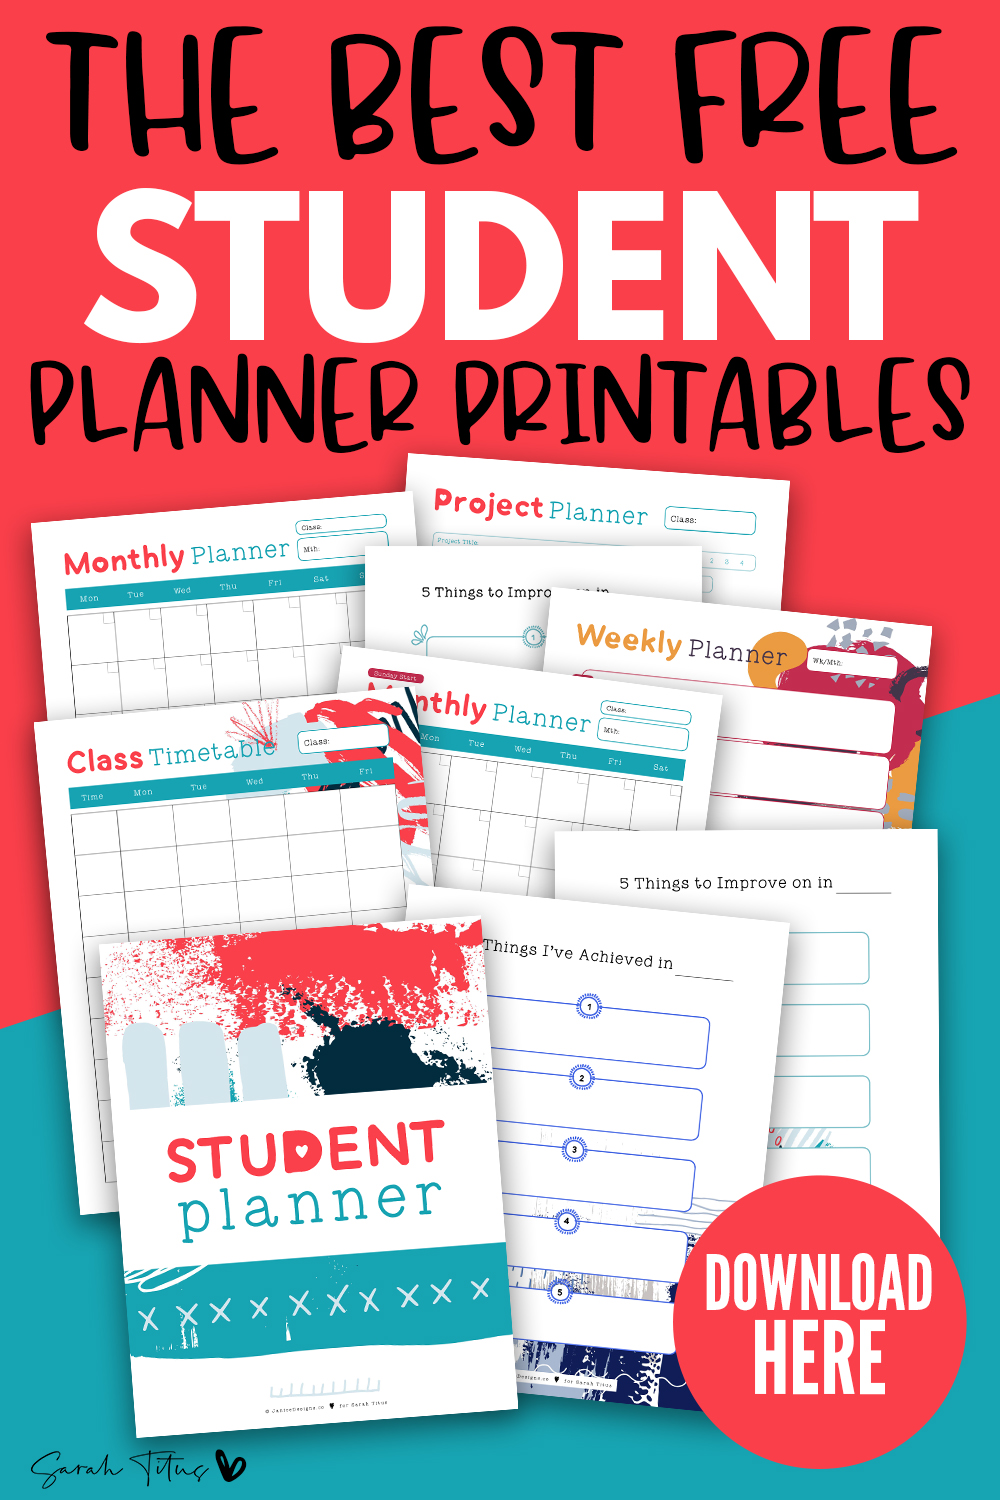 On your information, the structure consists of the header and the body. The Best Free Student Planner Printables Sarah Titus From Homeless To 8 Figures